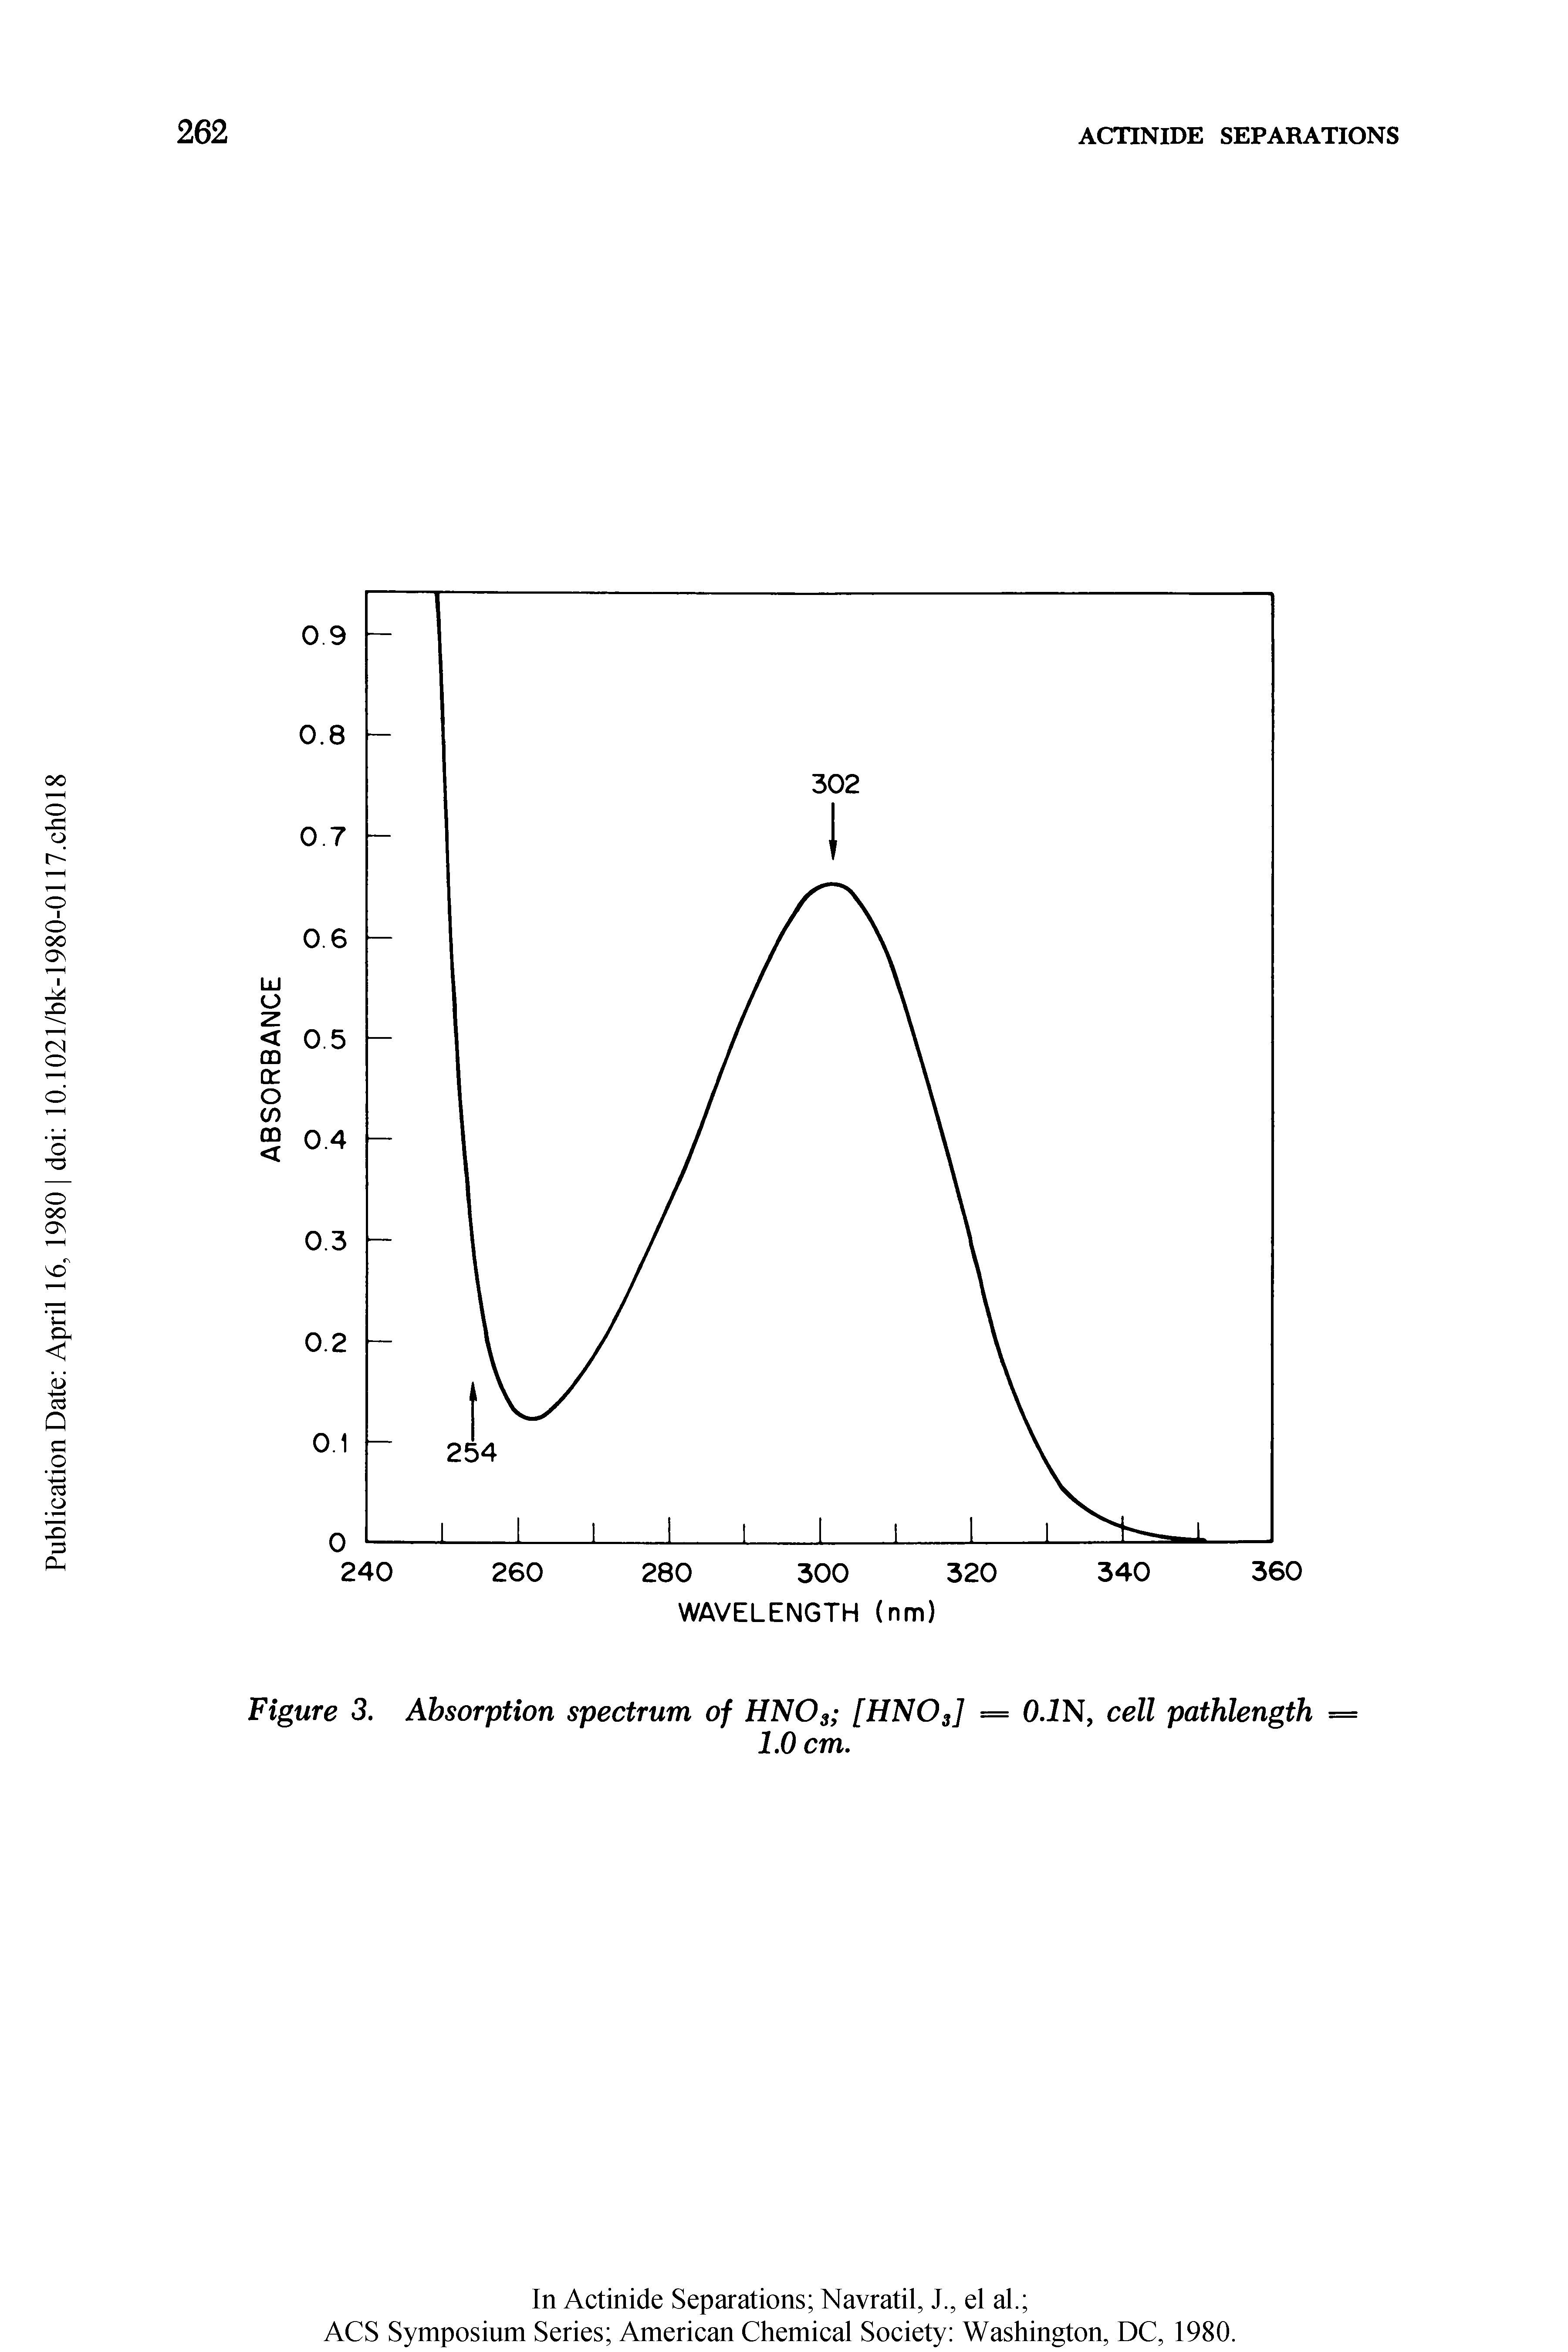 Figure 3. Absorption spectrum of HN03 [HN03] = O.IN, cell pathlength =...